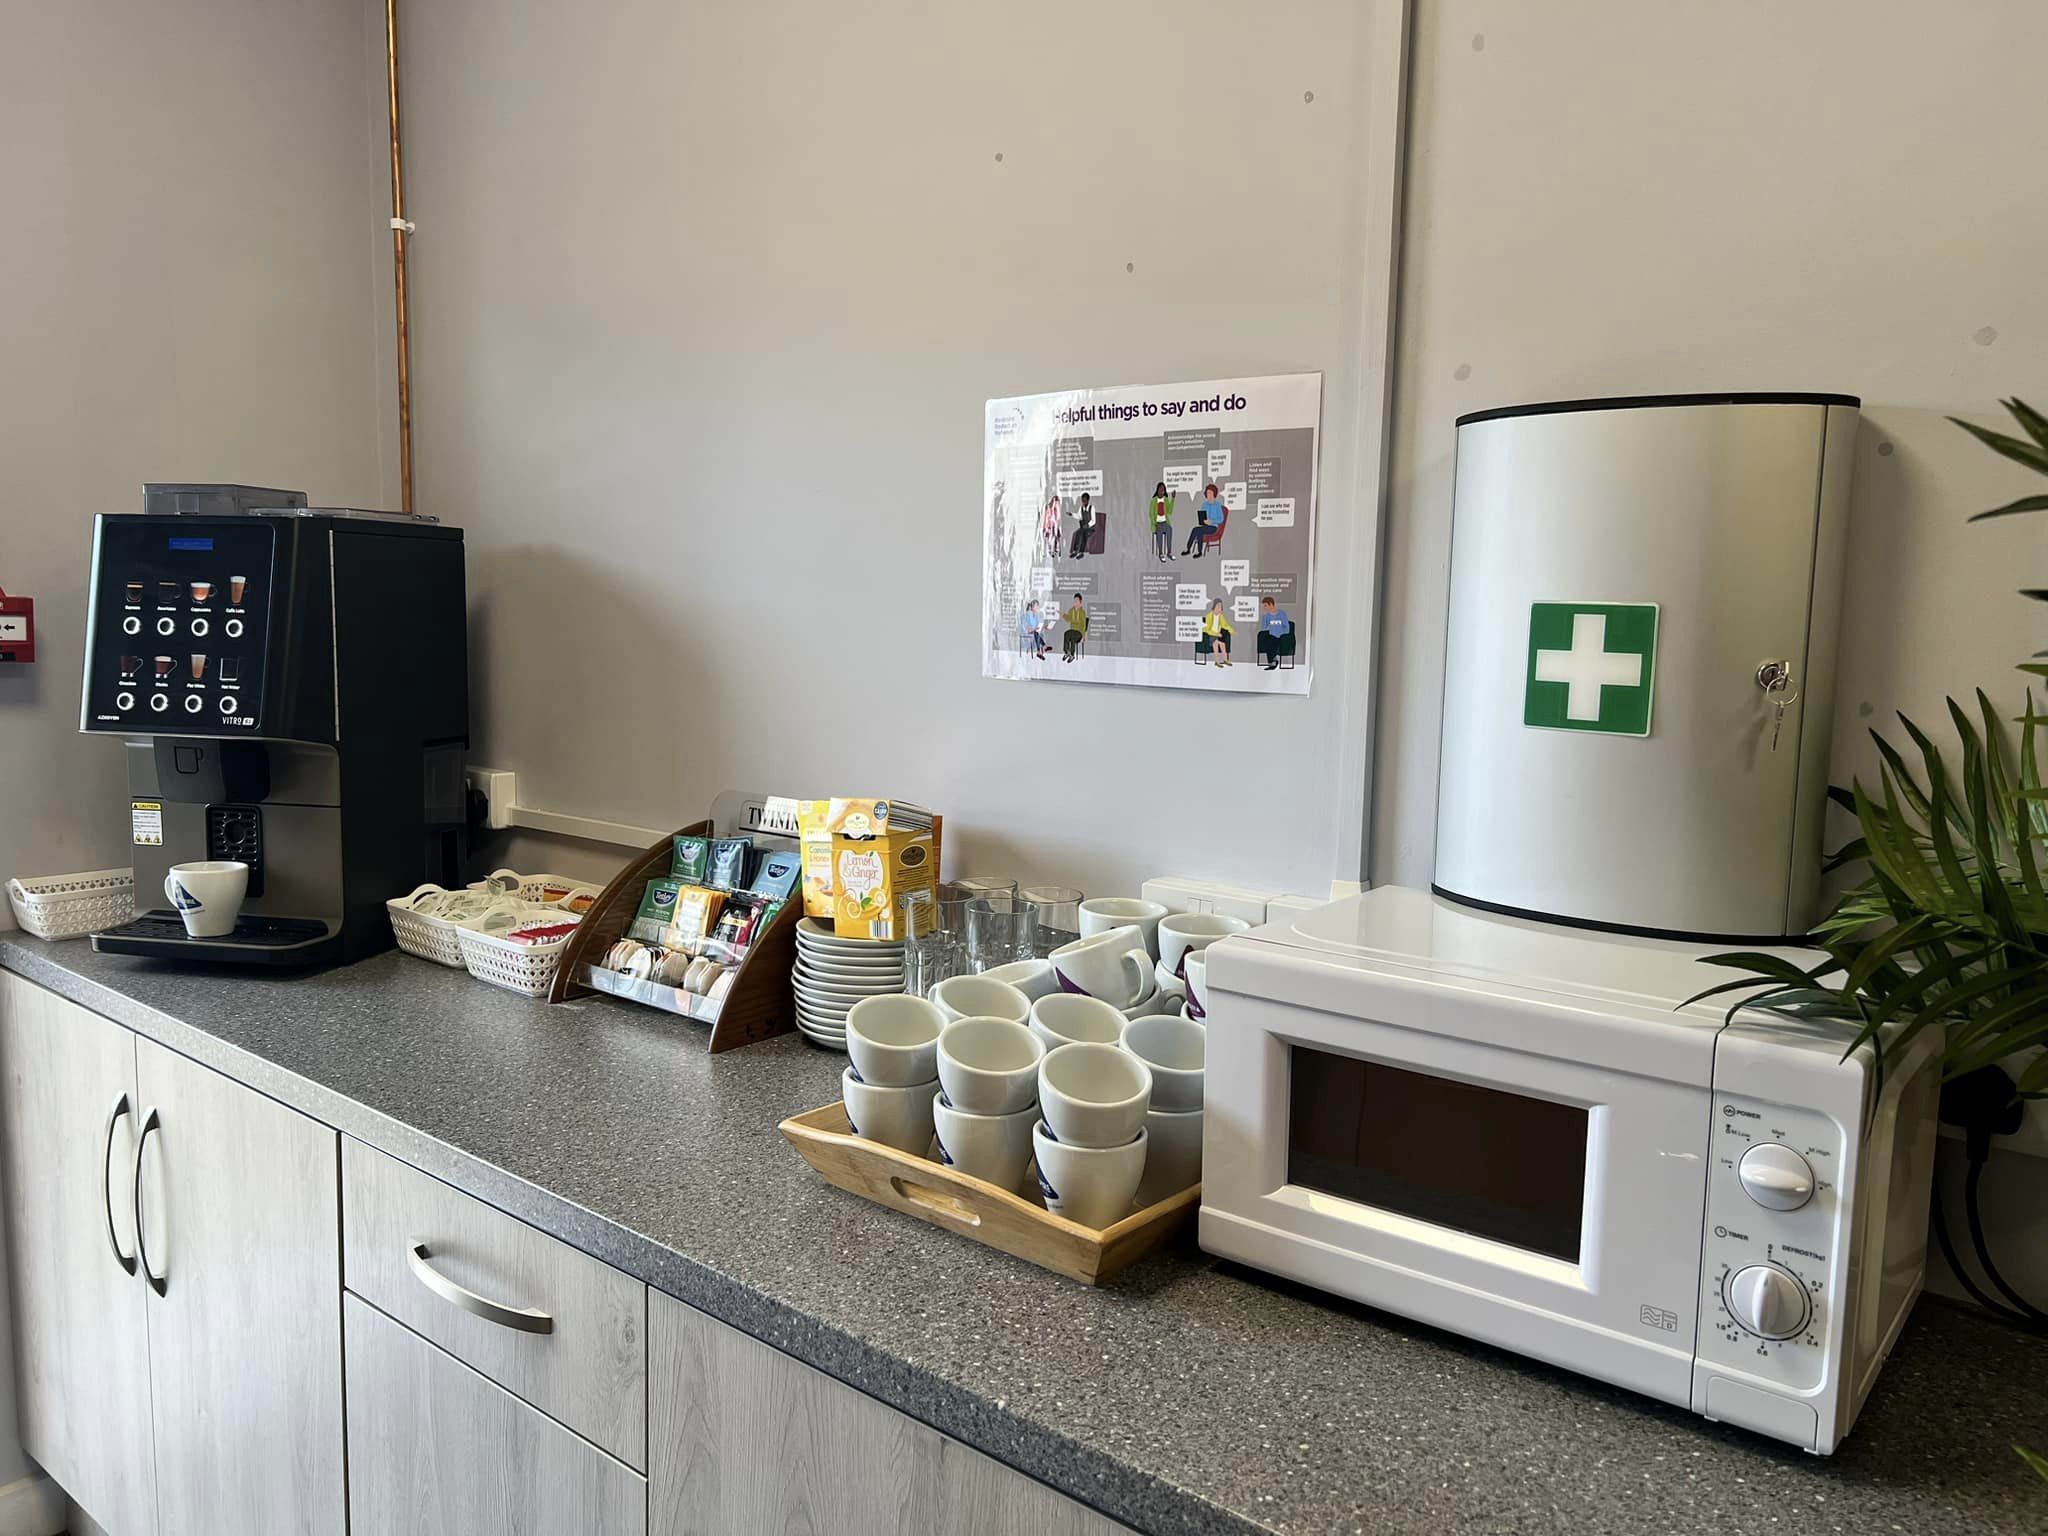 Training room facilities with coffee machine and first aid care